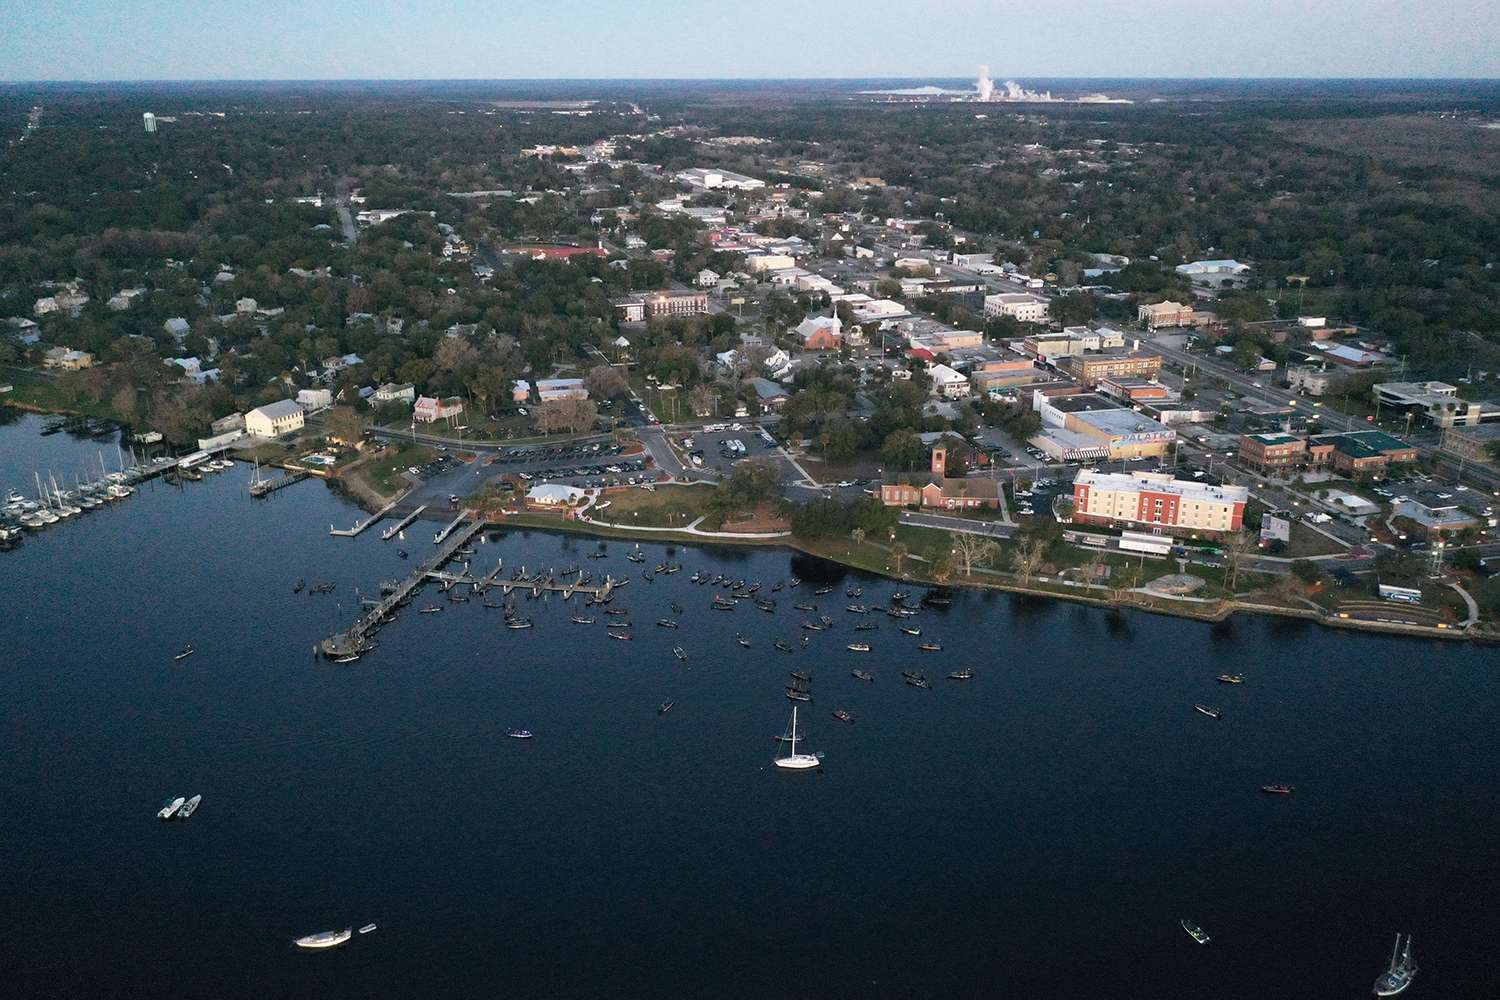 Enjoy this scenic view from above during the first official day of competition at the 2020 AFTCO Bassmaster Elite at St. Johns River.